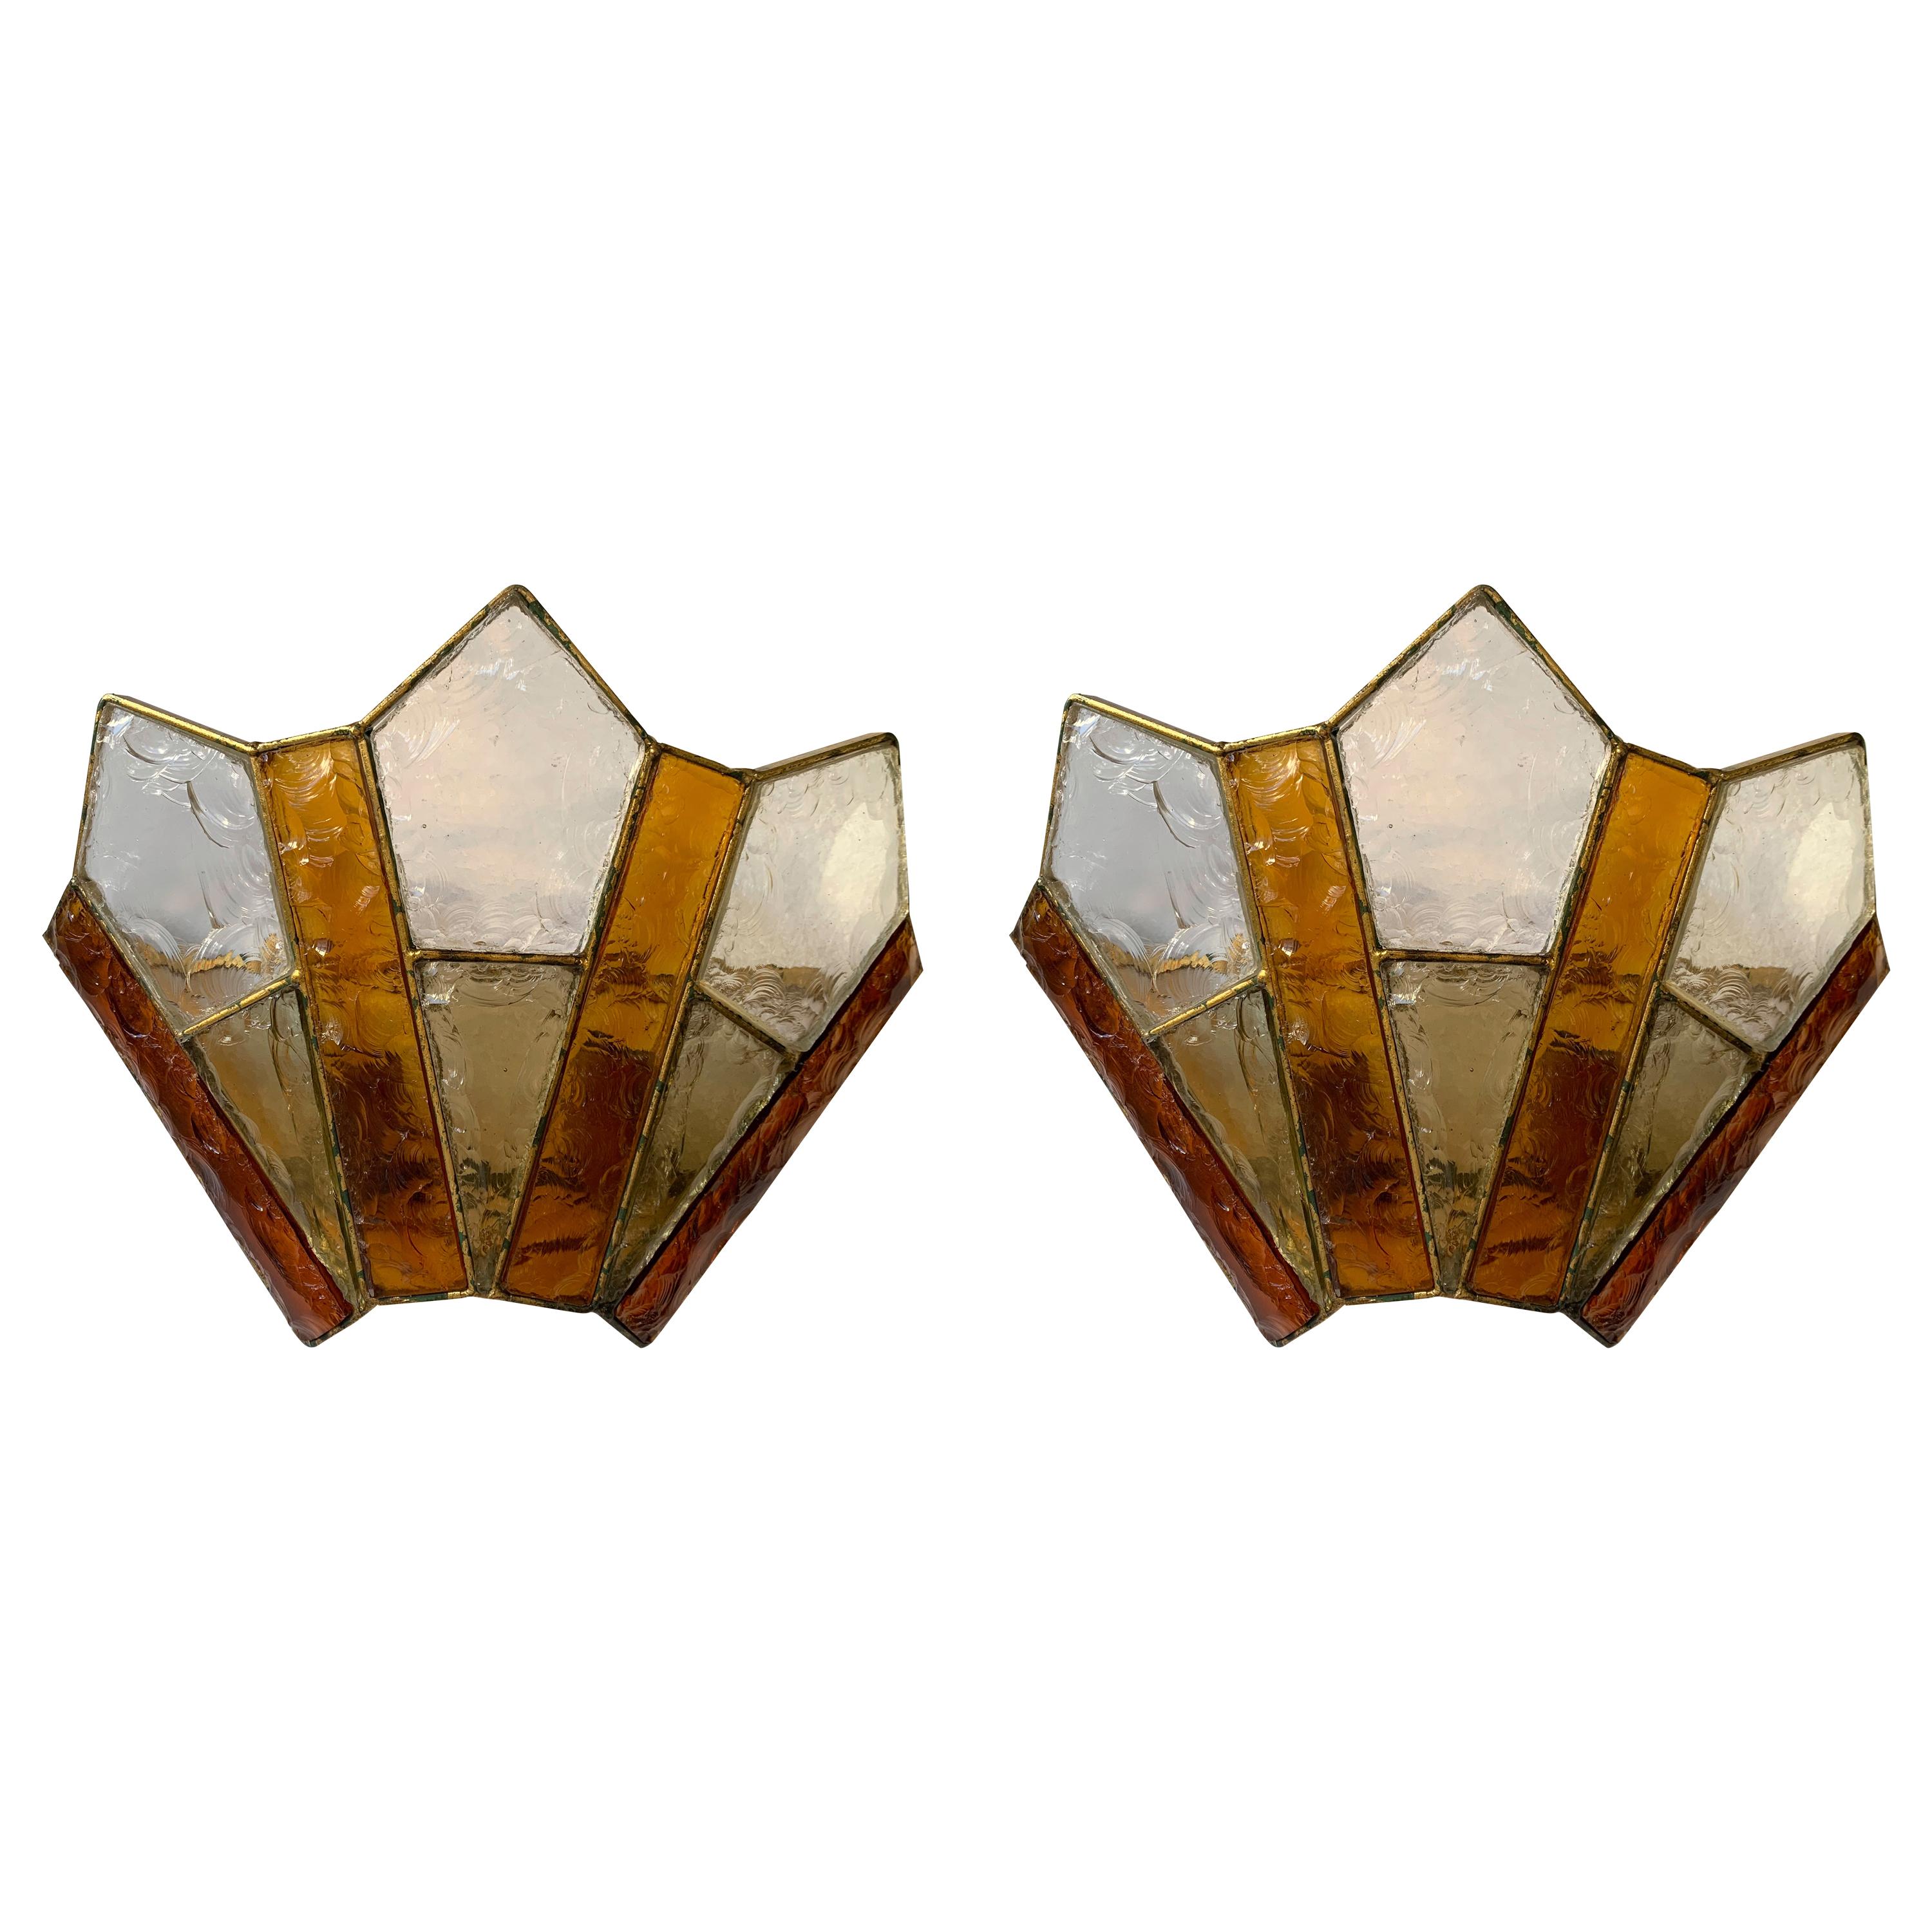 Pair of Sconces Hammered Glass Gold Wrought Iron by Longobard, Italy, 1970s